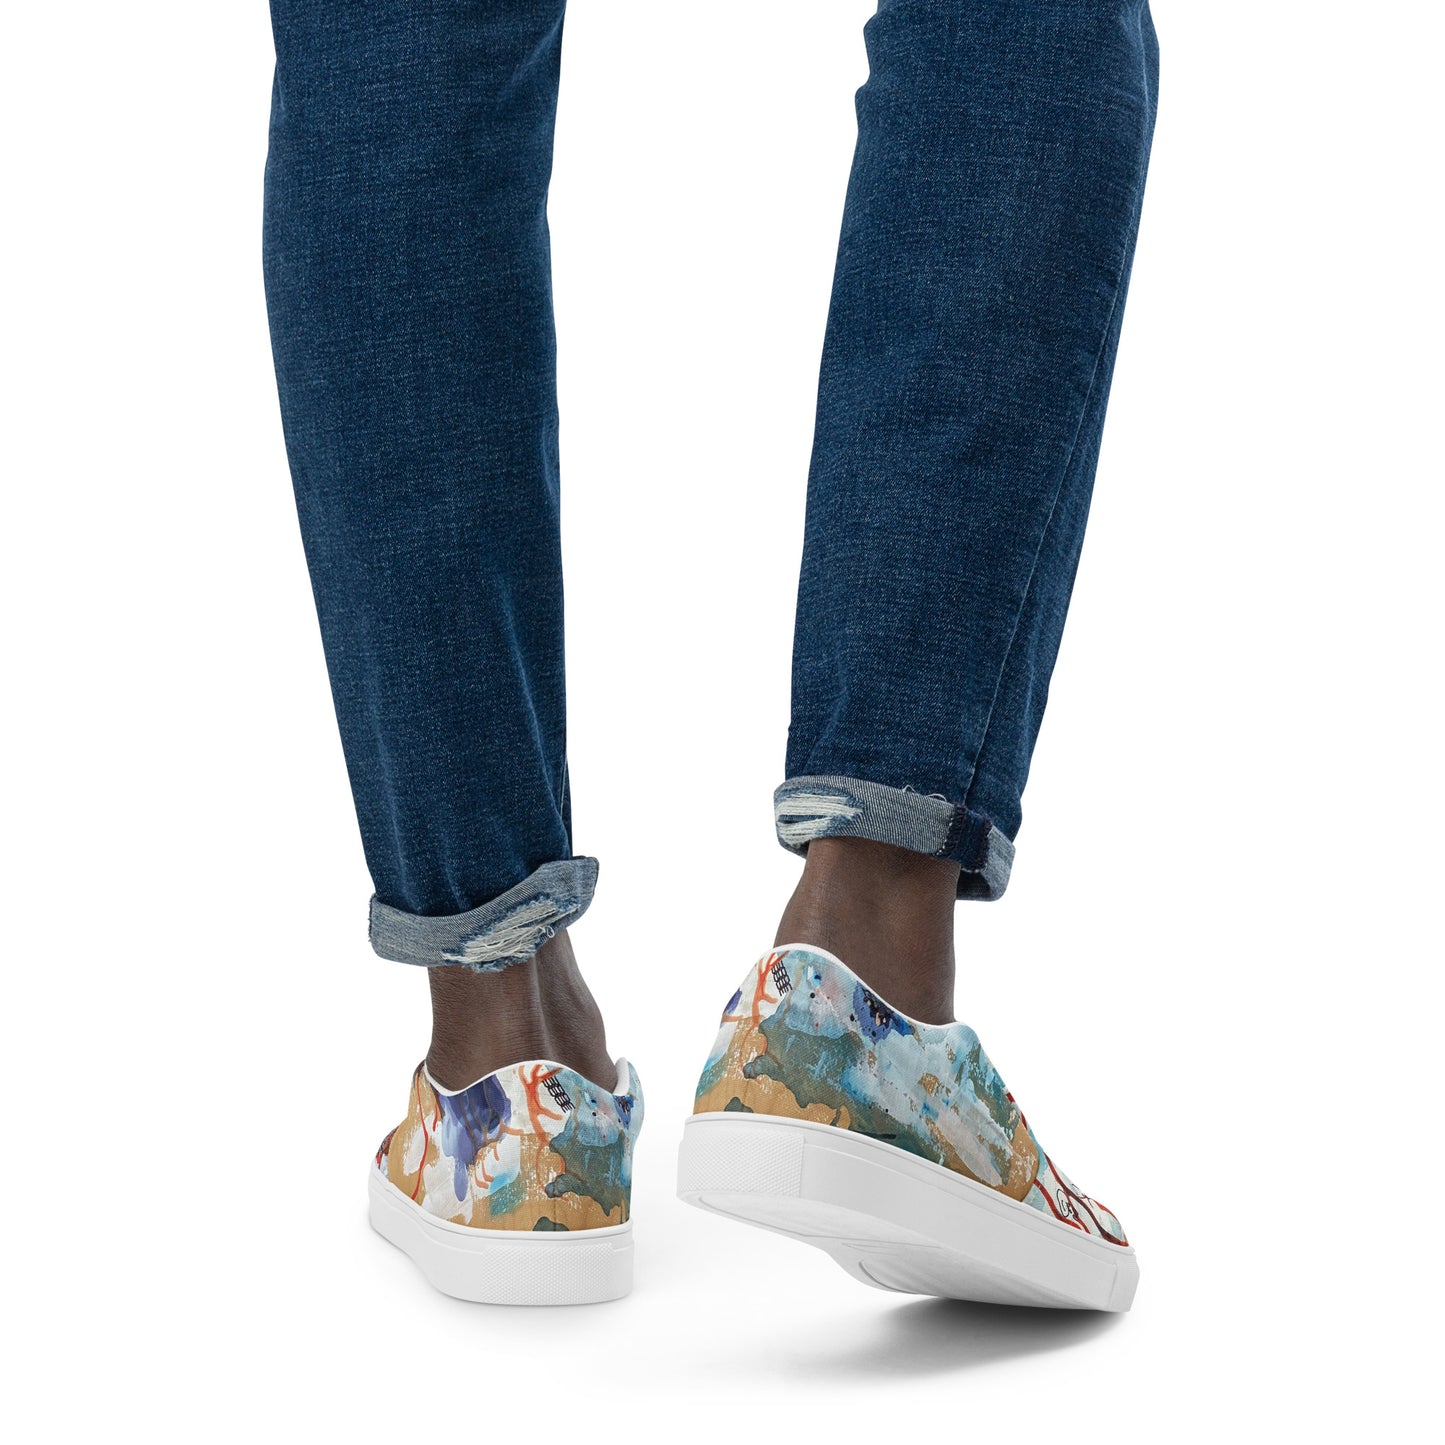 Chaussures slip-on en toile pour hommes - Freedom